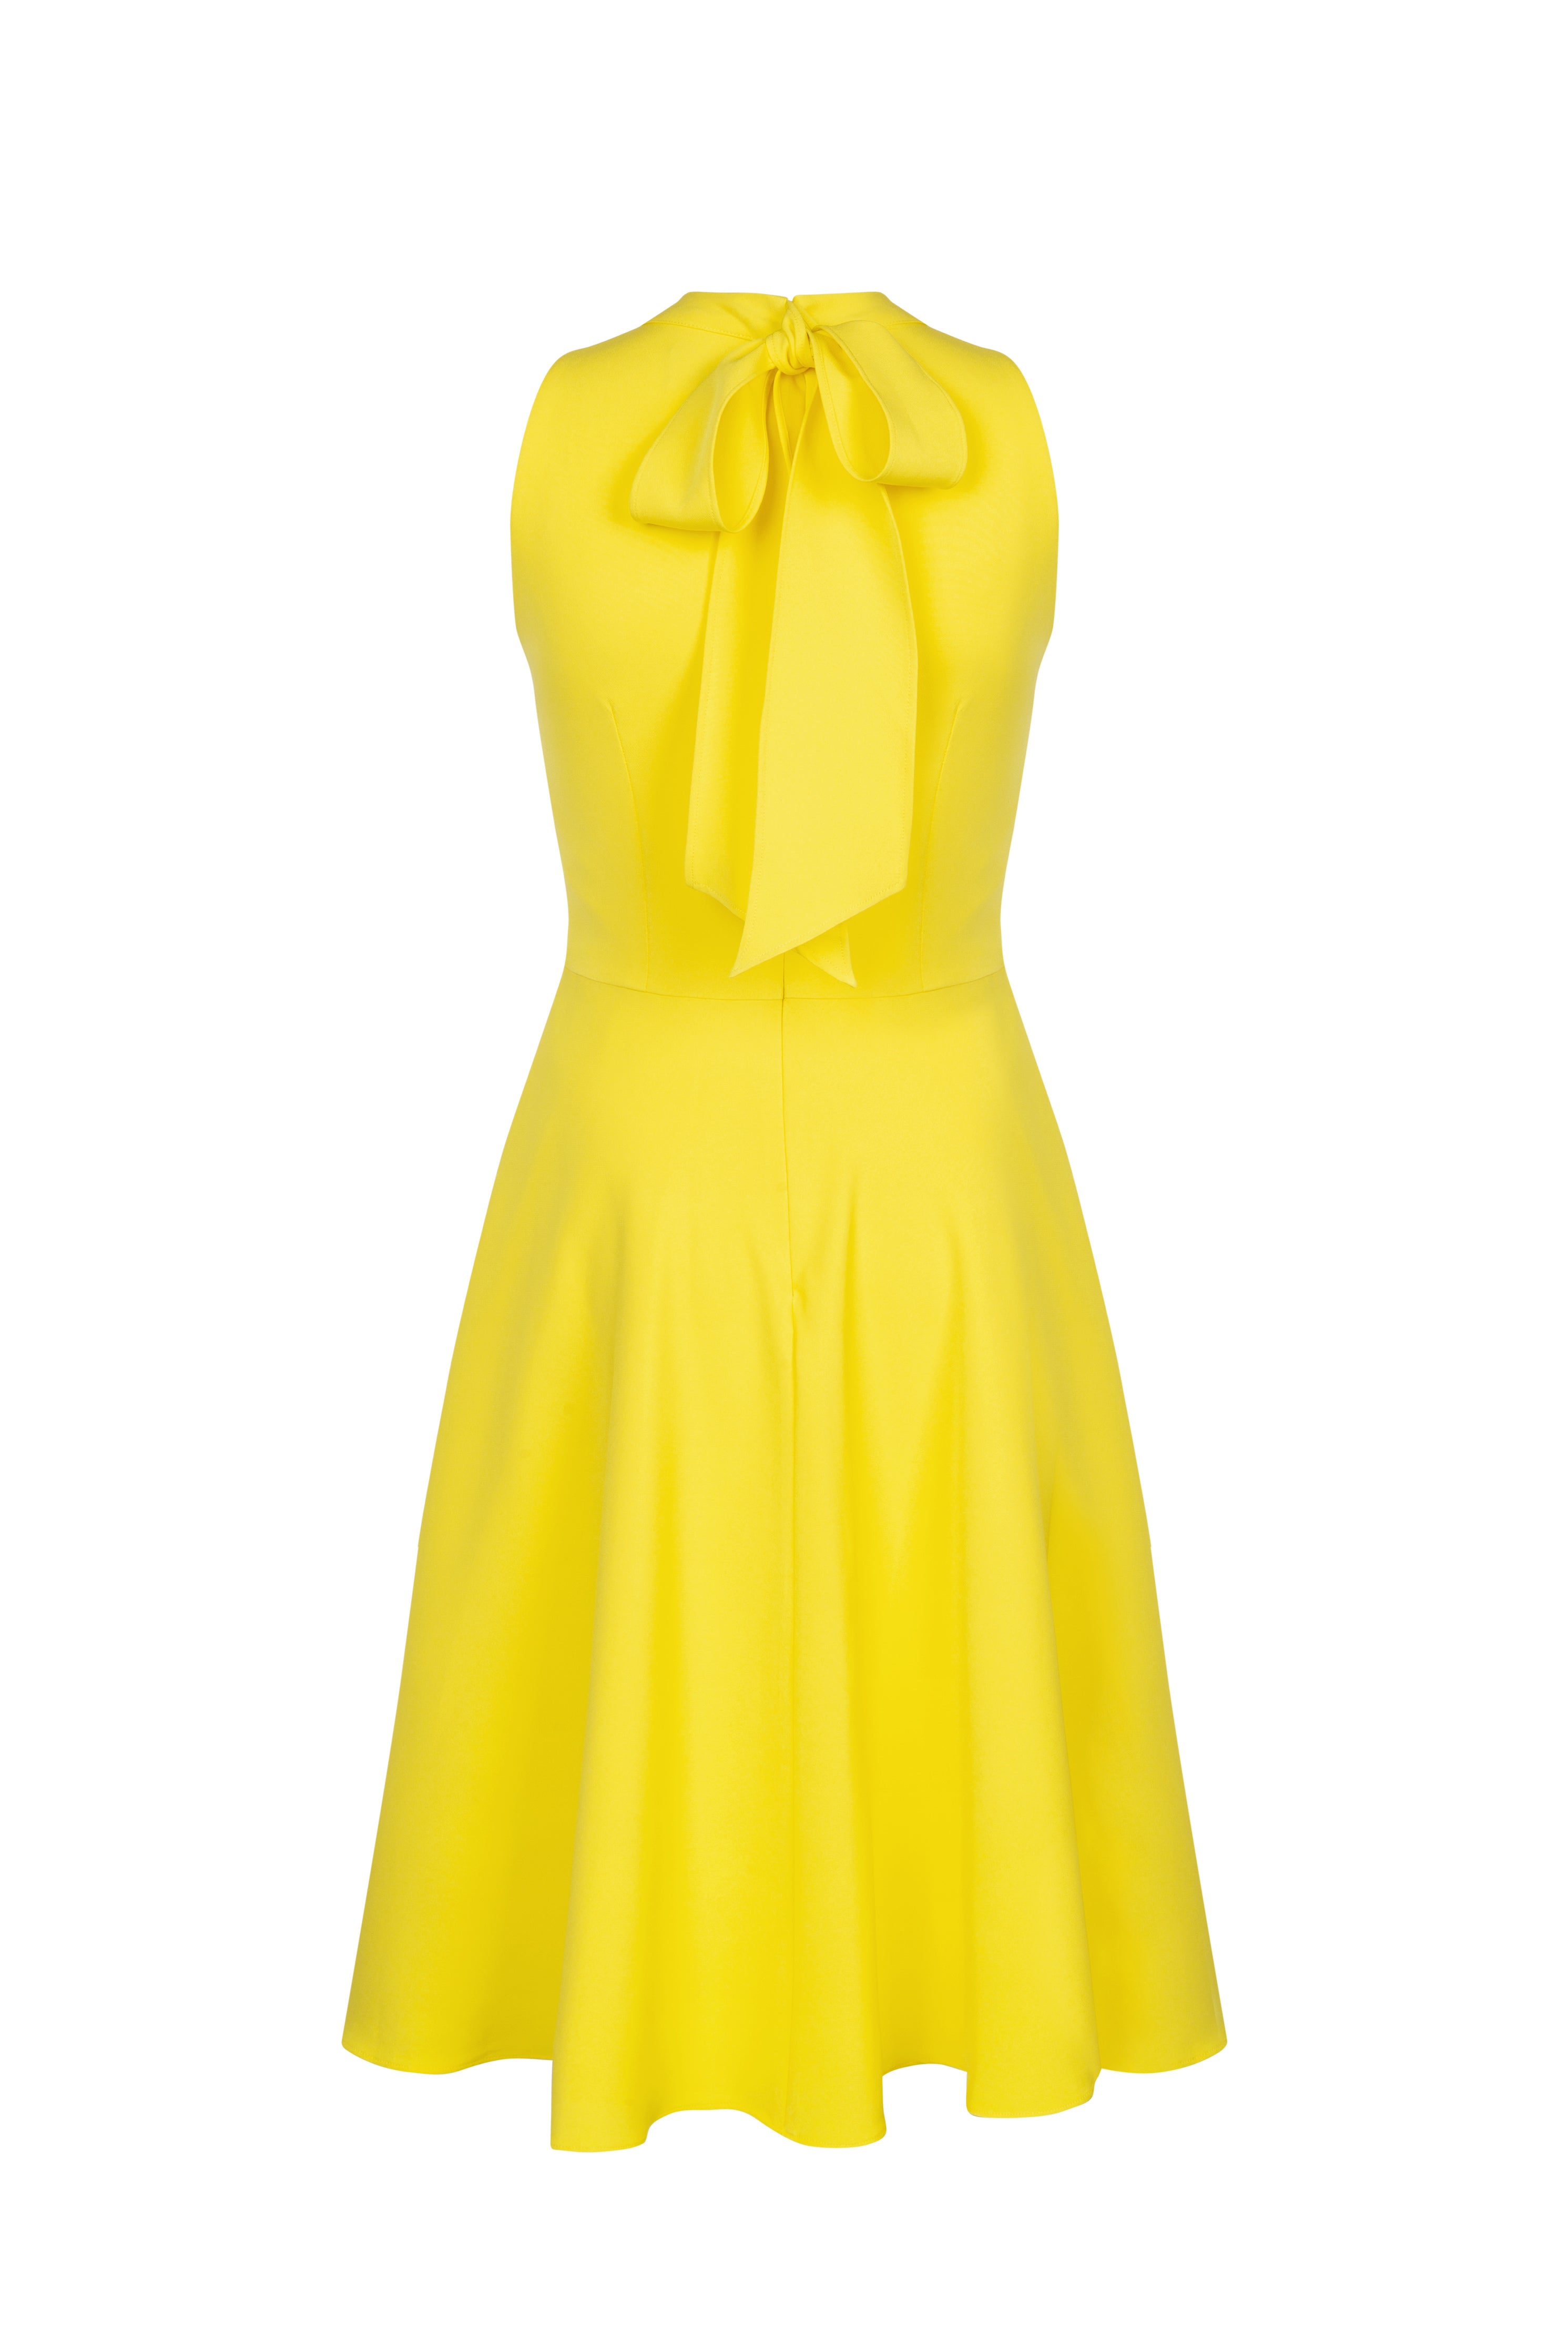 Back view of yellow summer dress with bow detail and flared skirt